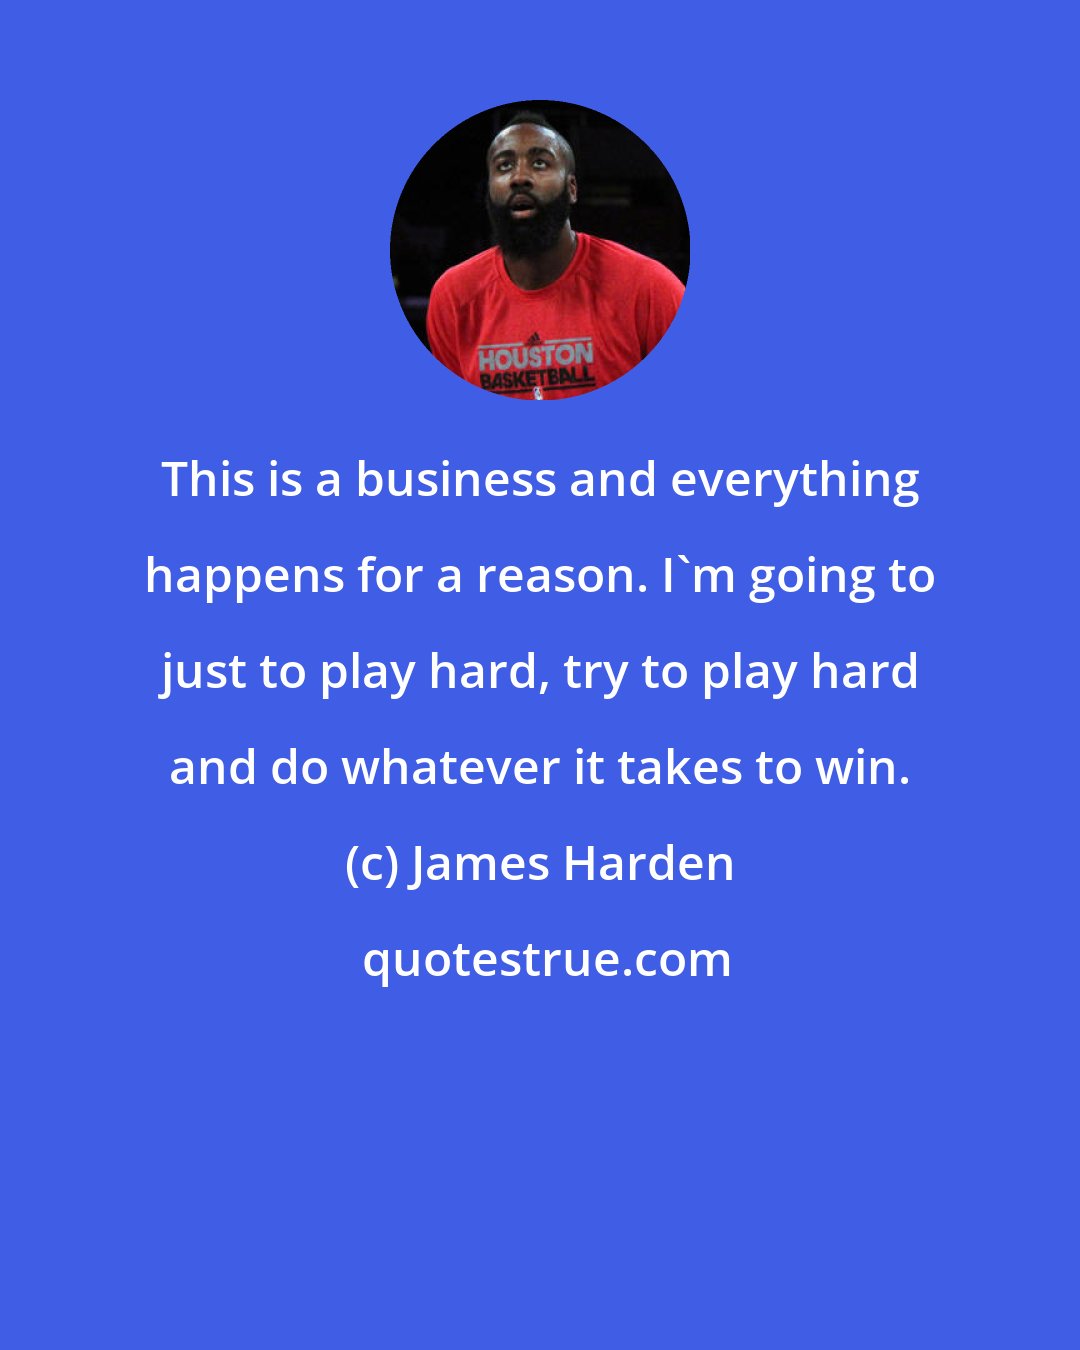 James Harden: This is a business and everything happens for a reason. I'm going to just to play hard, try to play hard and do whatever it takes to win.